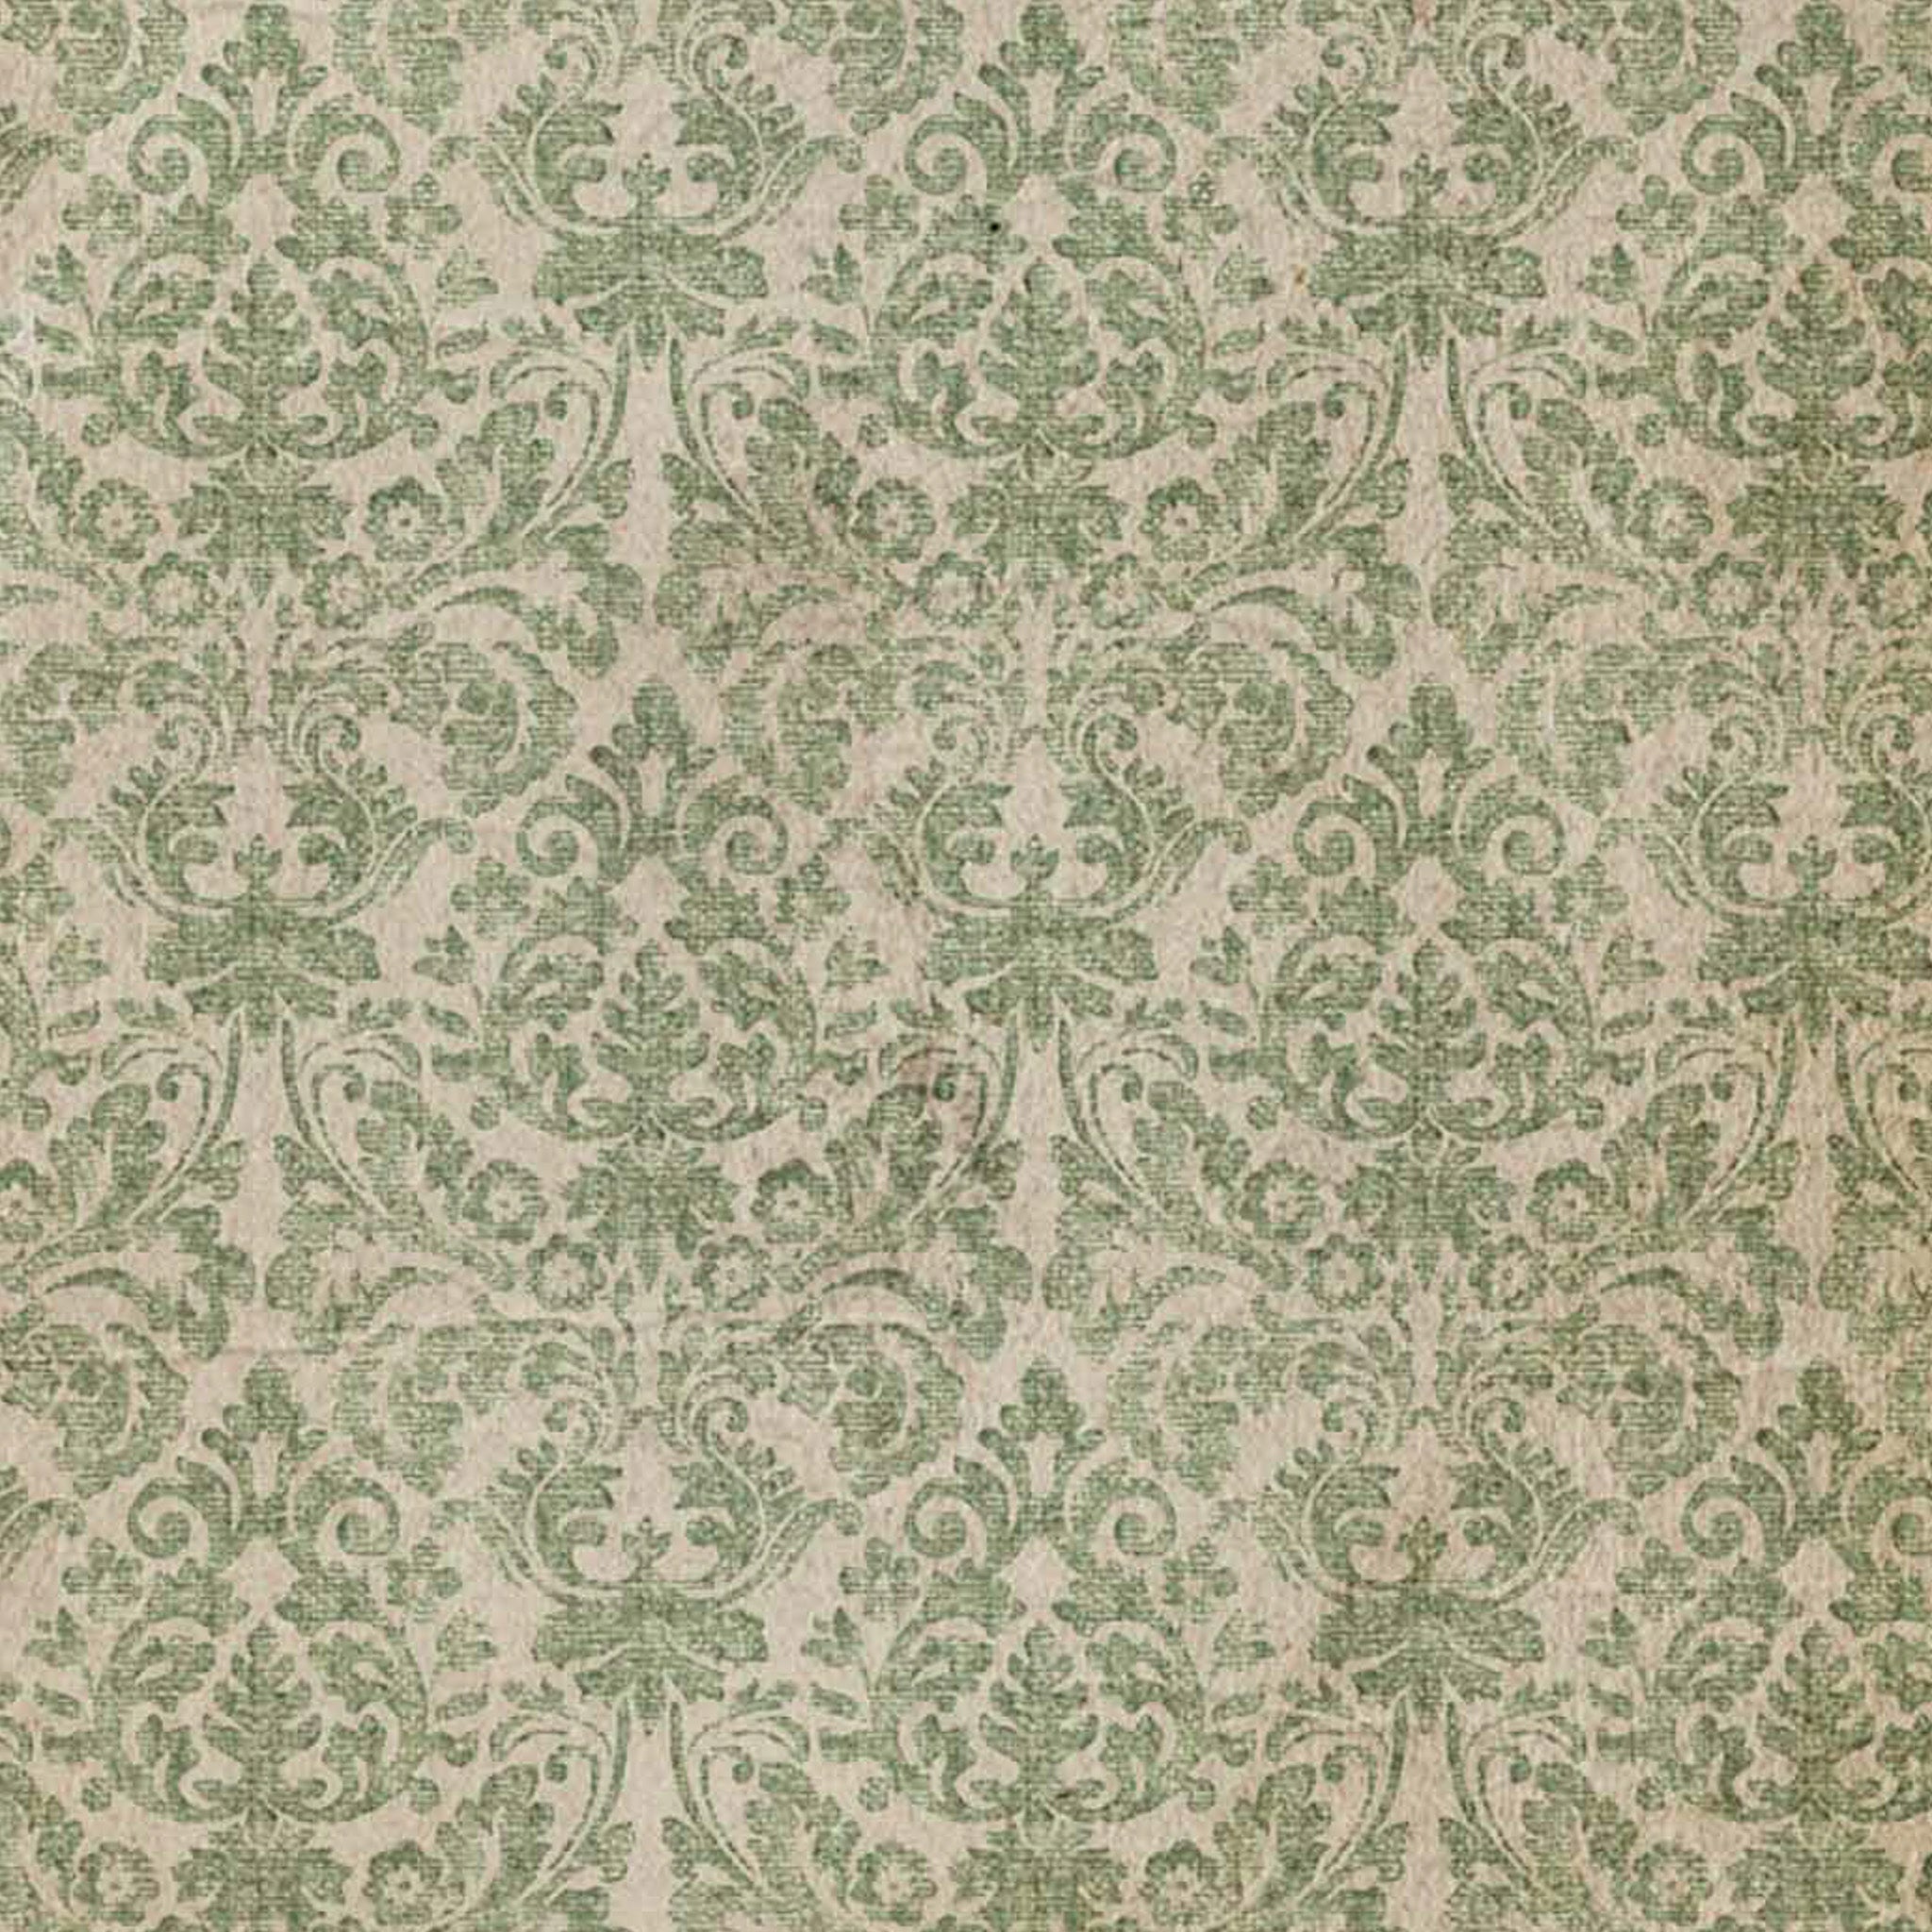 Vintage style Wallpaper Damask A2 Decoupage Rice Paper close up.